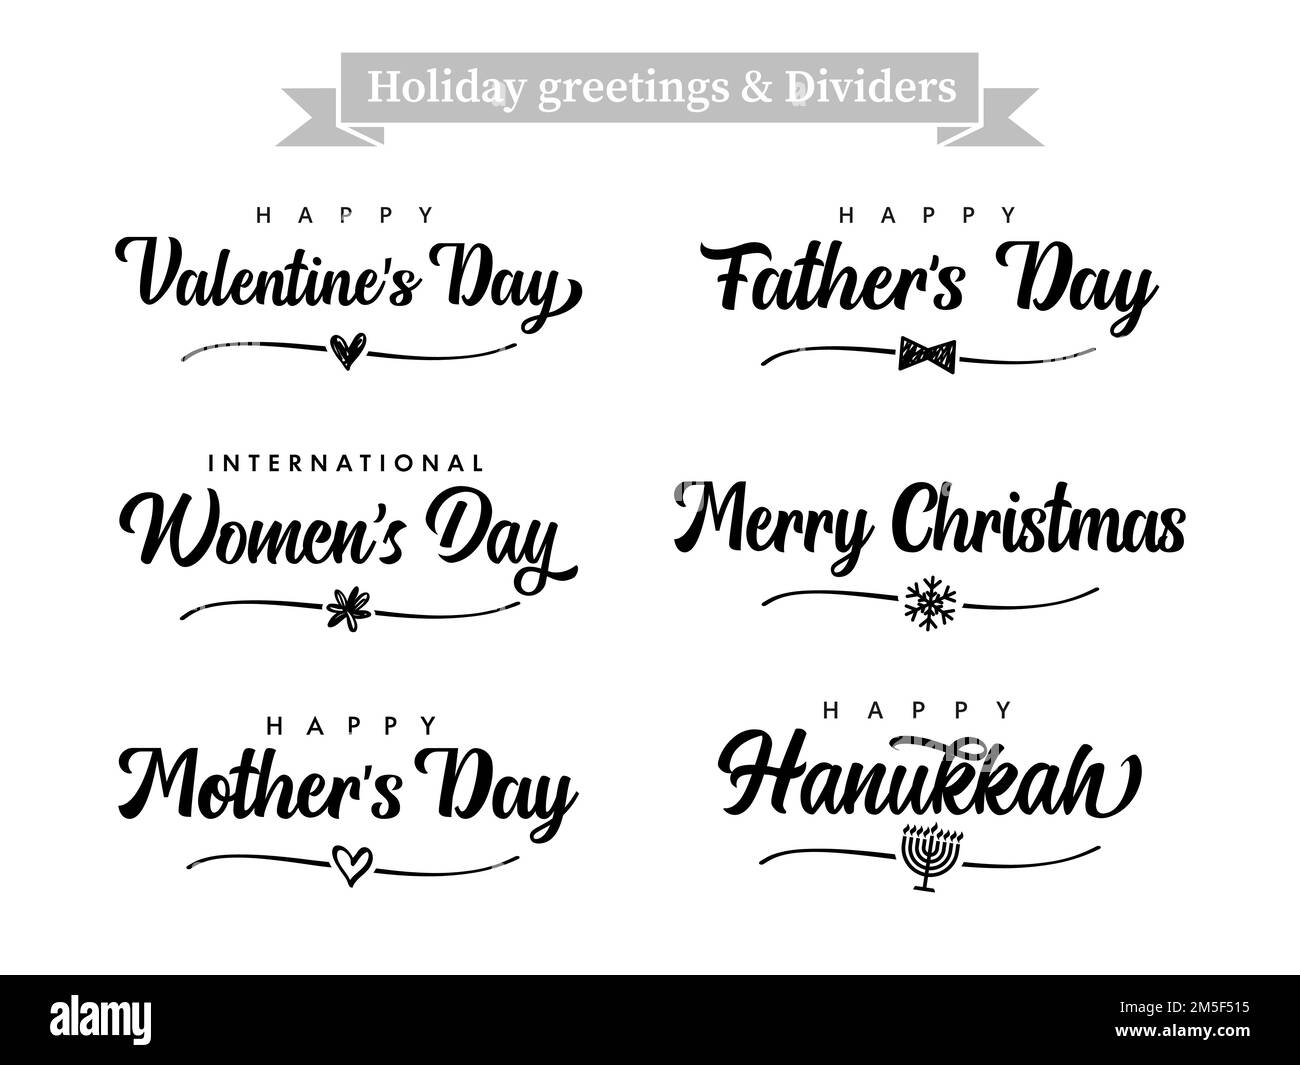 Set of Holiday greetings and dividers shape. Creative concept for Valentine's Day, Women's Day, Mother's and Father's Day, Christmas or Hanukkah Stock Vector